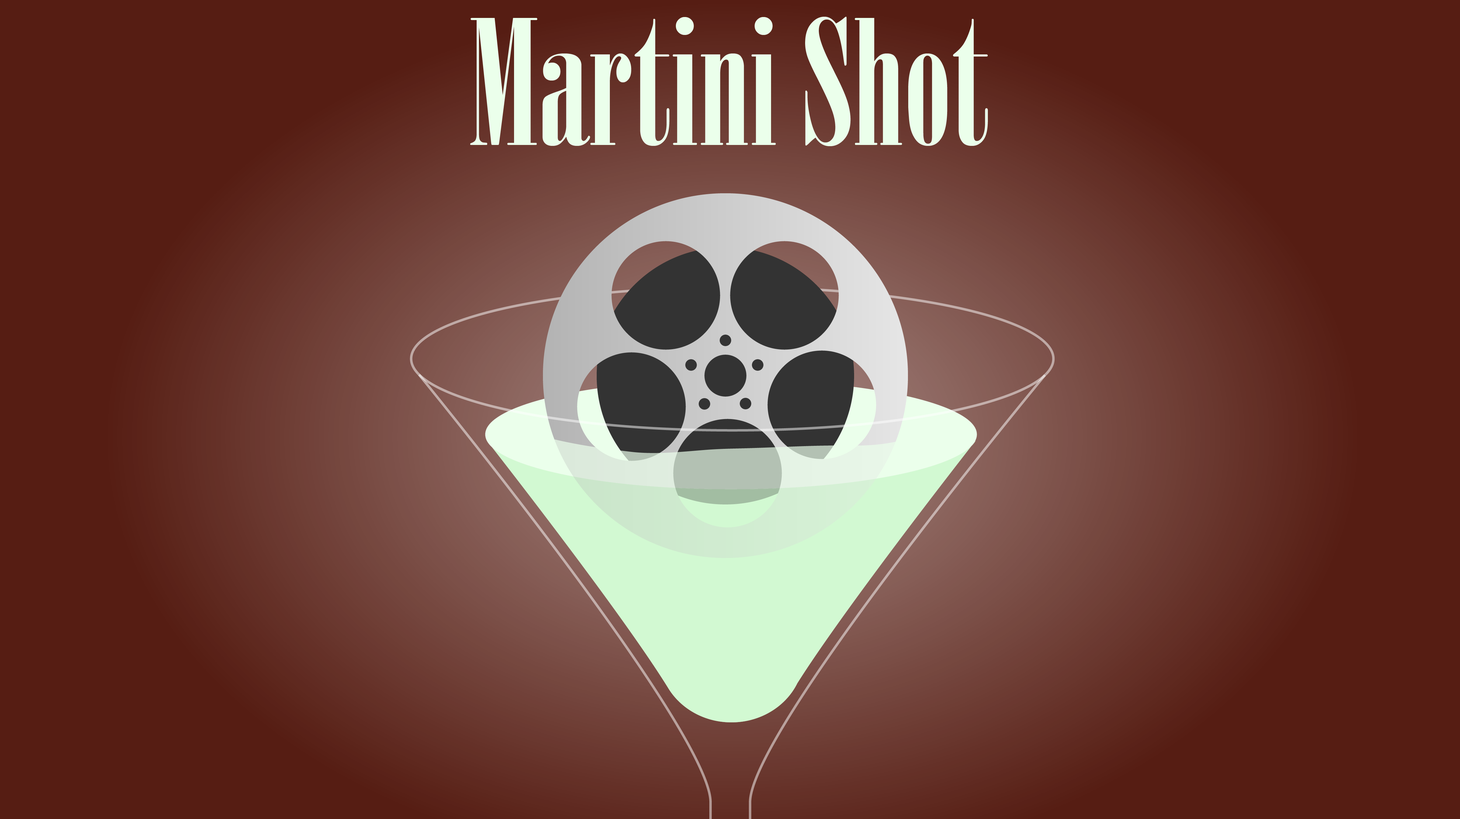 This is Rob Long and on today’s Martini Shot I clean things out for the new year. Digitally, I mean, Clips and ideas and files from an extremely cluttered Dropbox, iCloud, and Evernote.